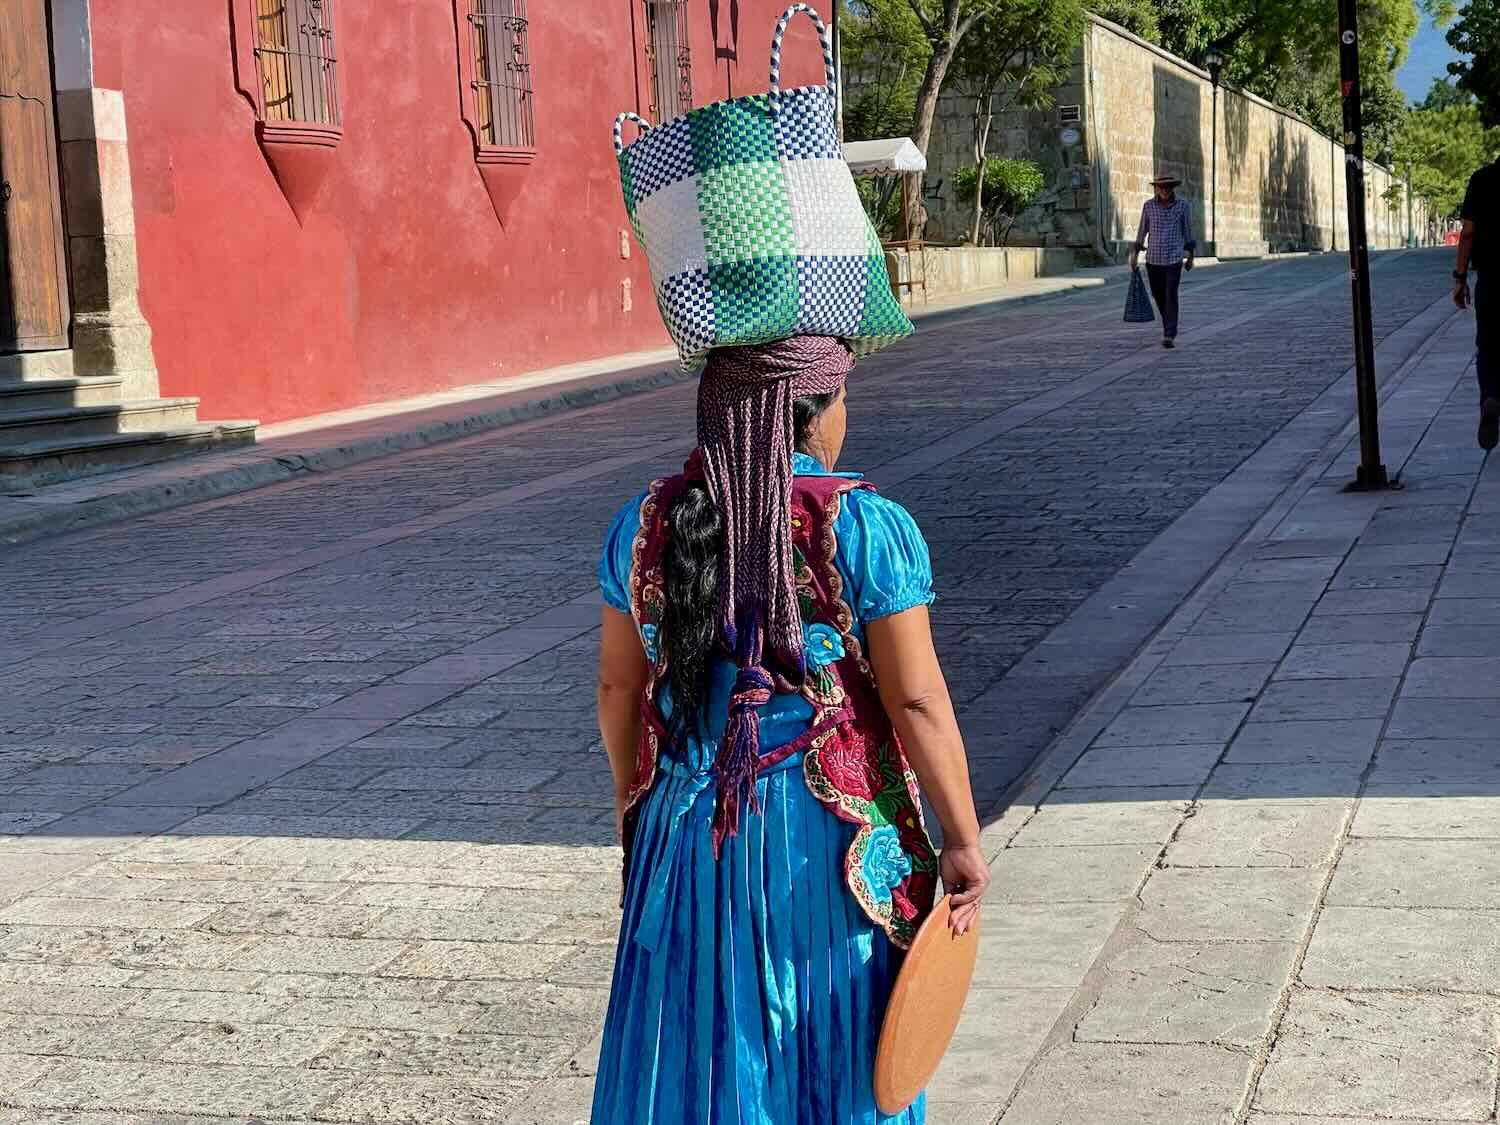 Traditional dress is still worn in many rural Oaxacan towns, even when they visit the "big city"